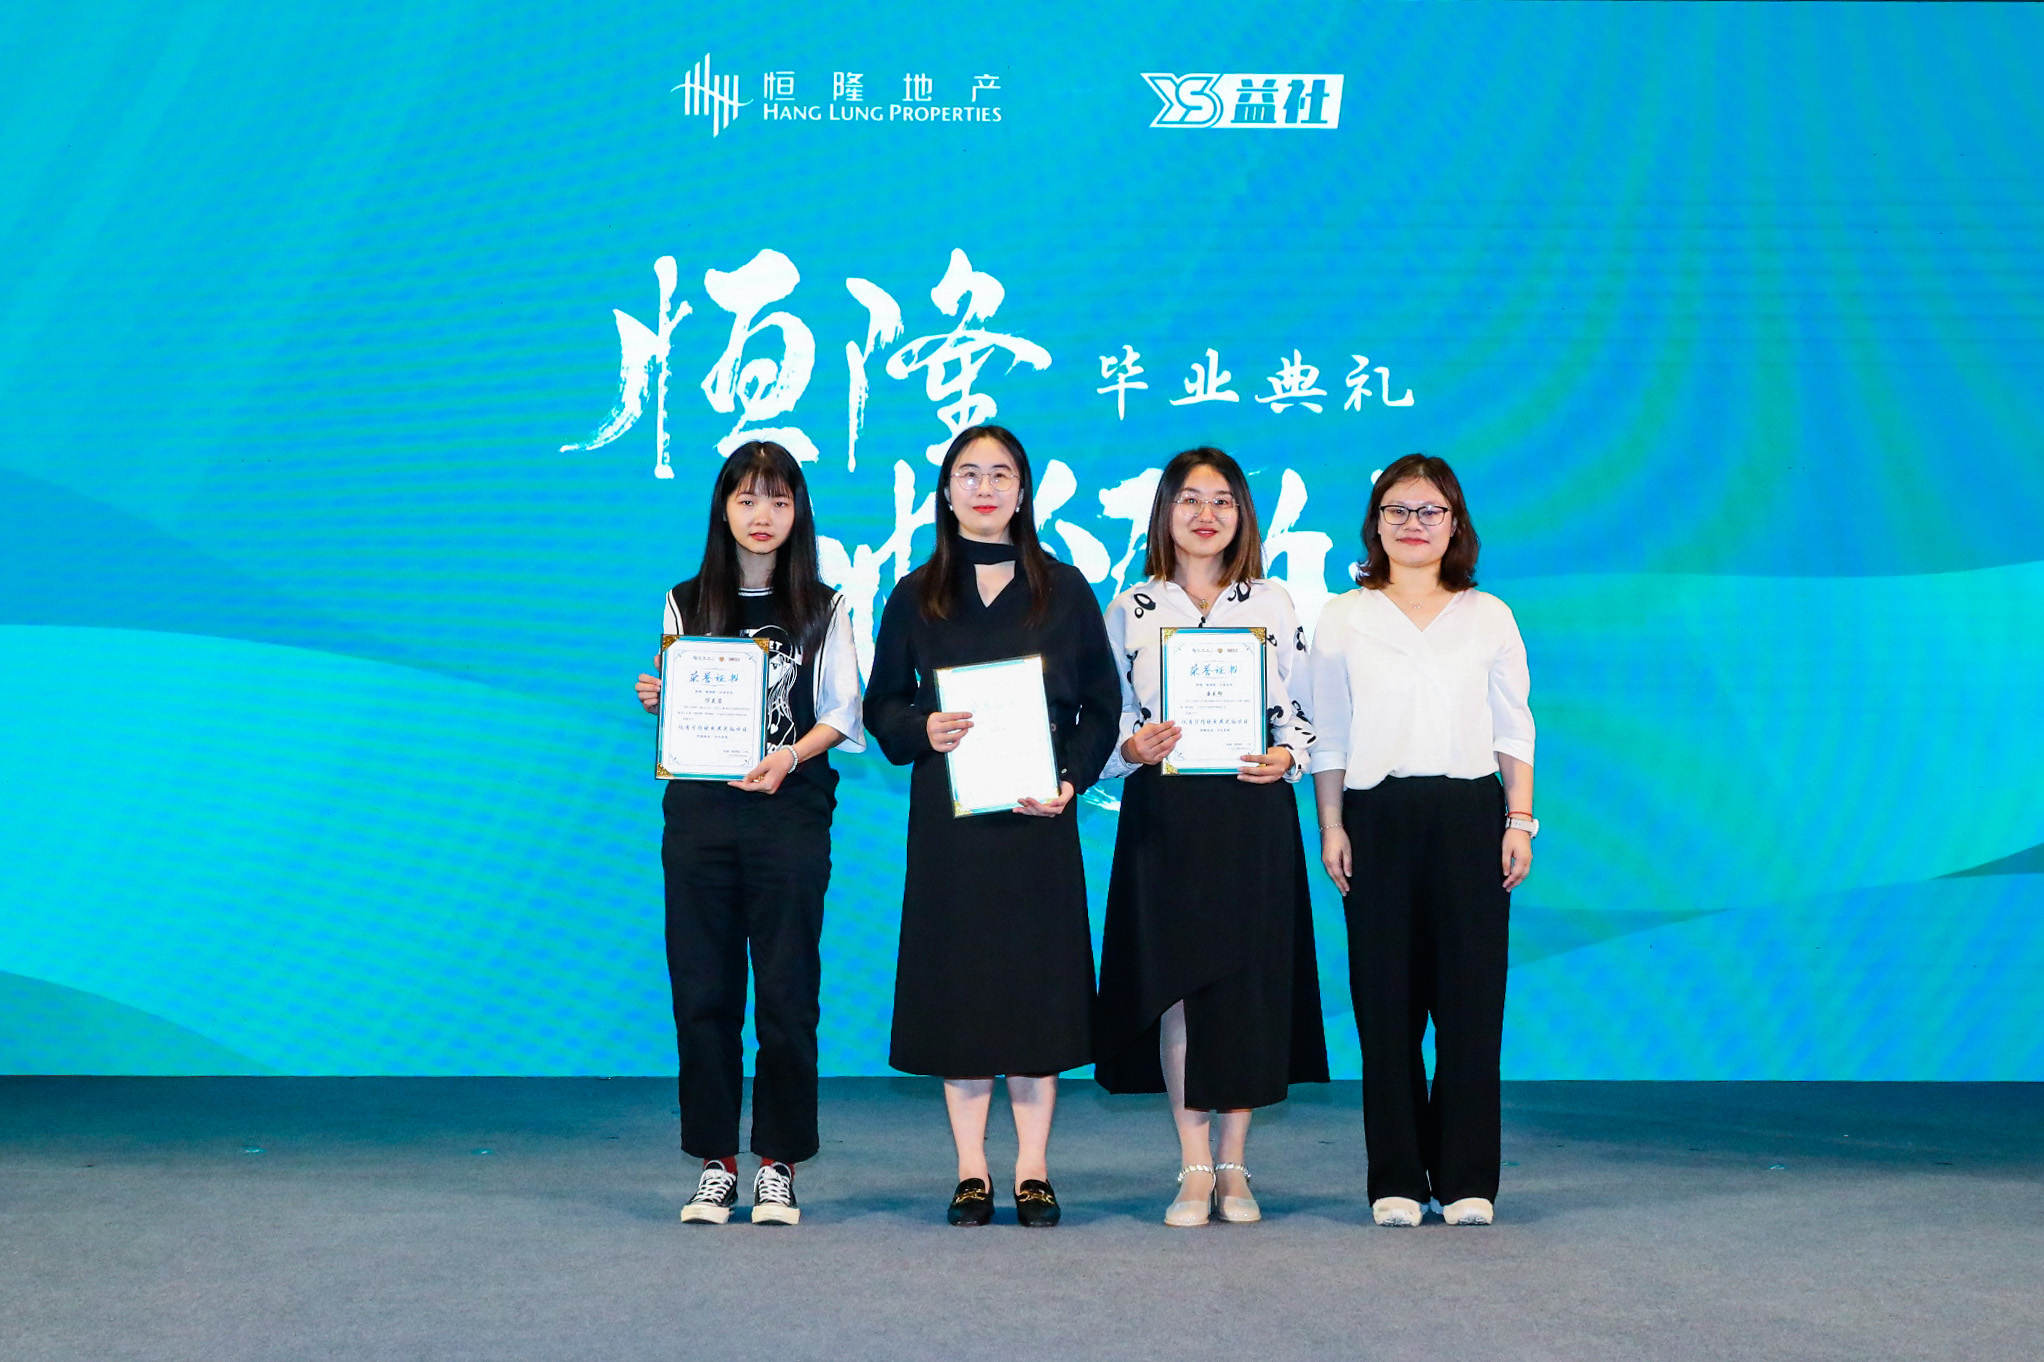 Ms. Chen Yang (far right), Deputy Secretary of Jing'an Youth League Committee, presents awards to the Outstanding Sustainable Community Project teams